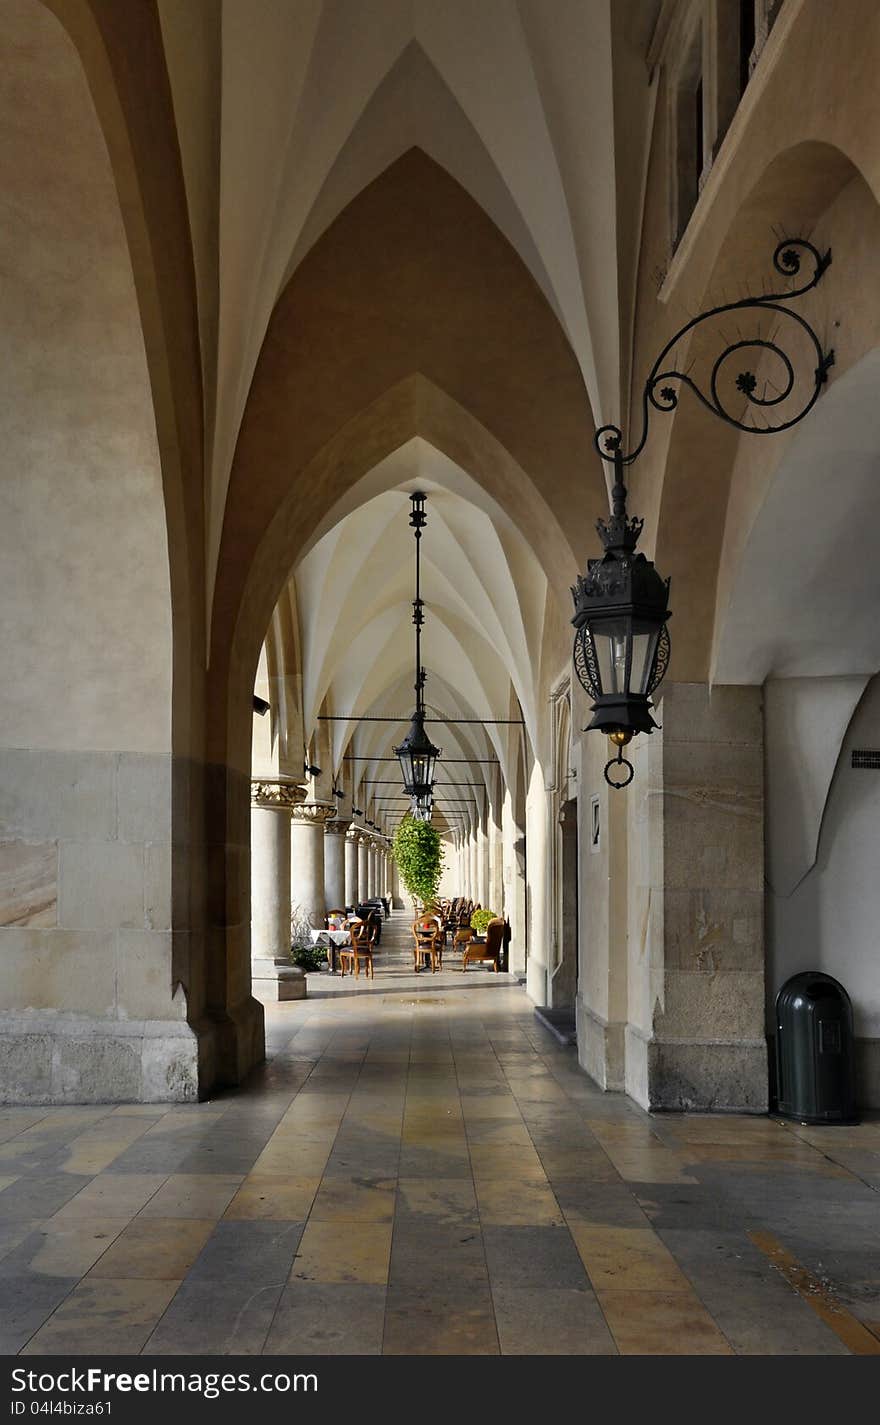 The gothic arcades of Sukiennice (Cloth Hall, Drapers' Hall) on the Main Market Square in Krakow, Poland, with an outdoor cafe. The gothic arcades of Sukiennice (Cloth Hall, Drapers' Hall) on the Main Market Square in Krakow, Poland, with an outdoor cafe